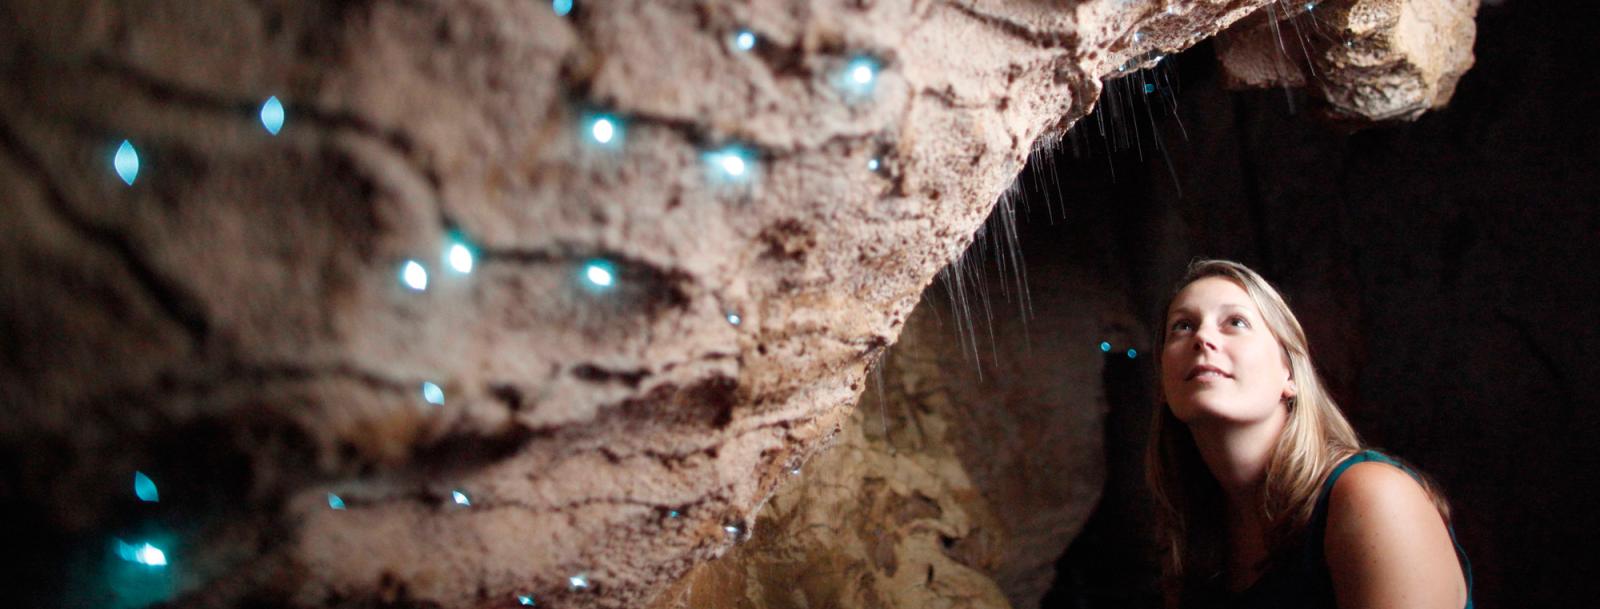 View of the glowing glowworms as found at Waitomo Caves.